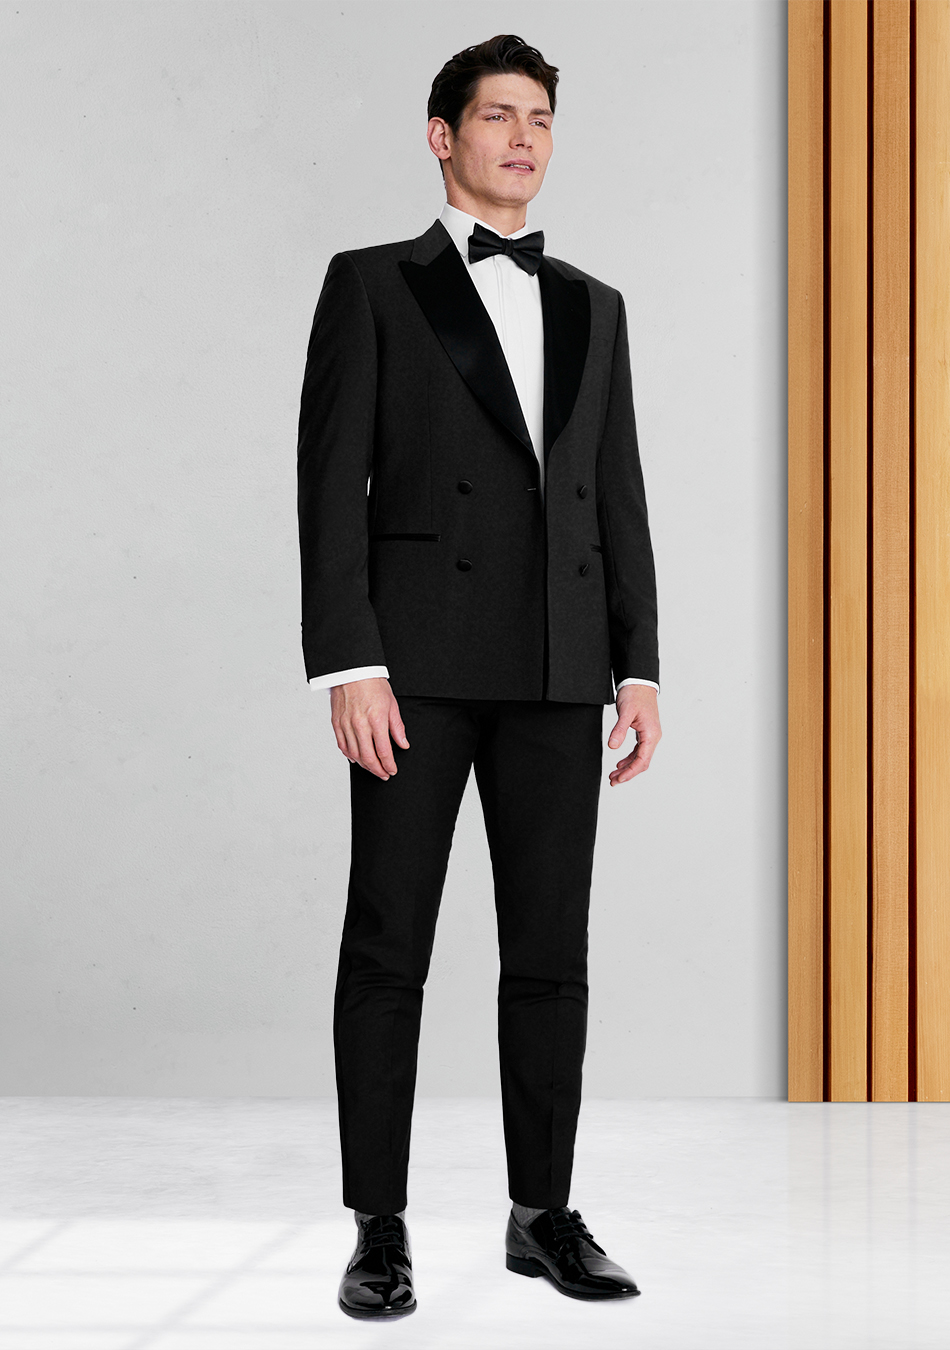 Black double-breasted tuxedo, white shirt, black bow tie, and black derby shoes